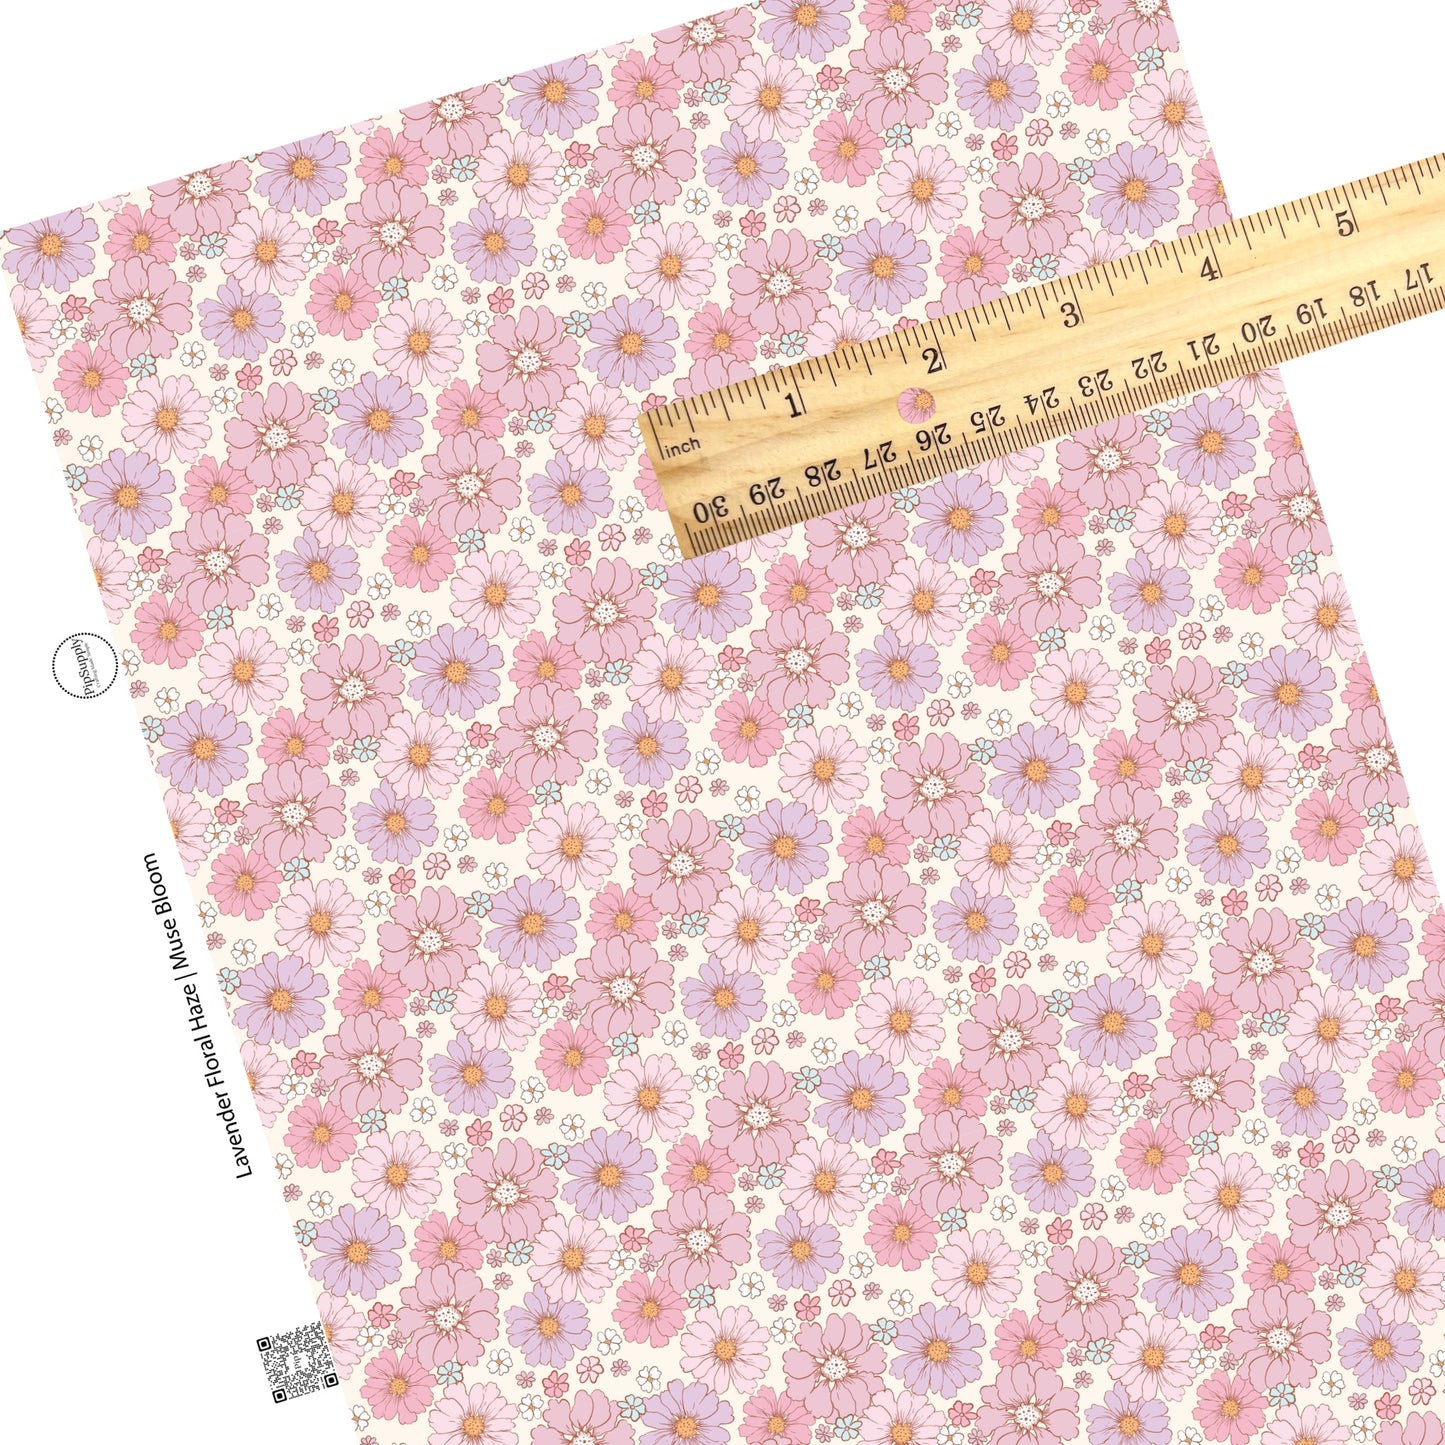 Big lavender and pink flowers with tiny pink, purple, white, and aqua floral on cream faux leather sheets